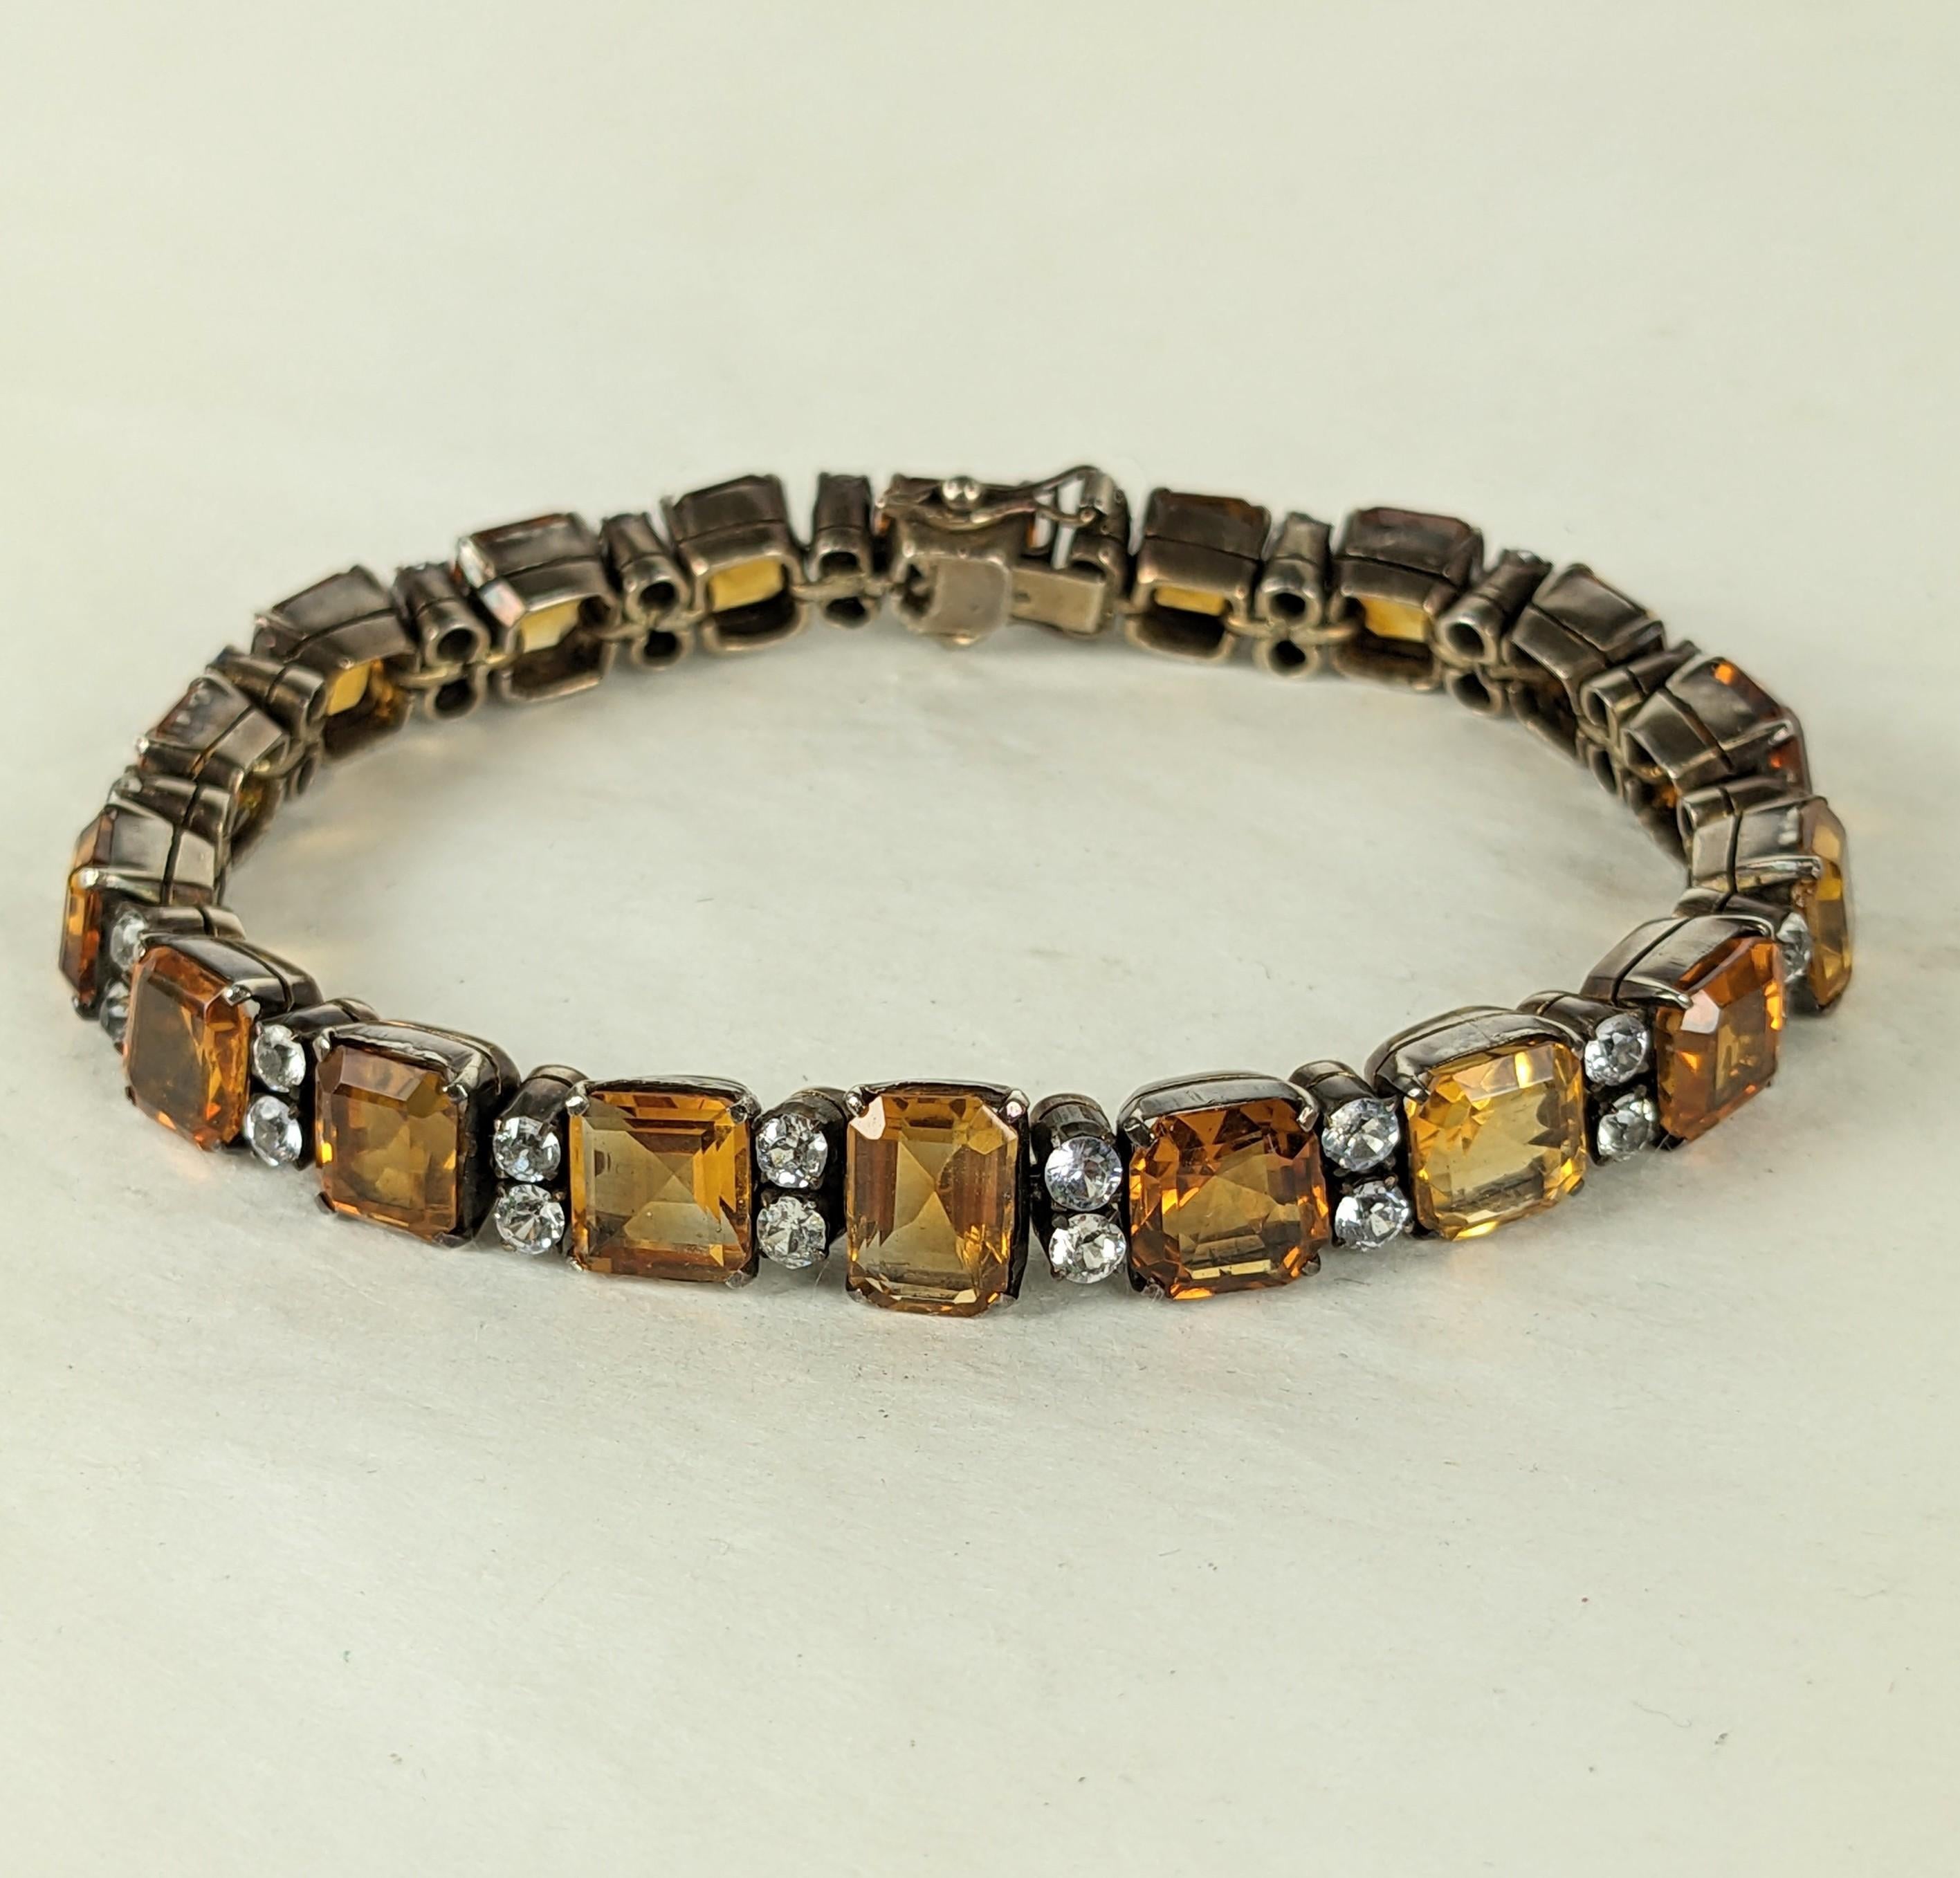 Attractive Art Deco Citrine Line Bracelet spaced with white zircons set in sterling vermeil. Unusual bracelet with multisized citrine gemstones with slight tonal variations and cuts. Most bracelets from this period are set with citrine pastes